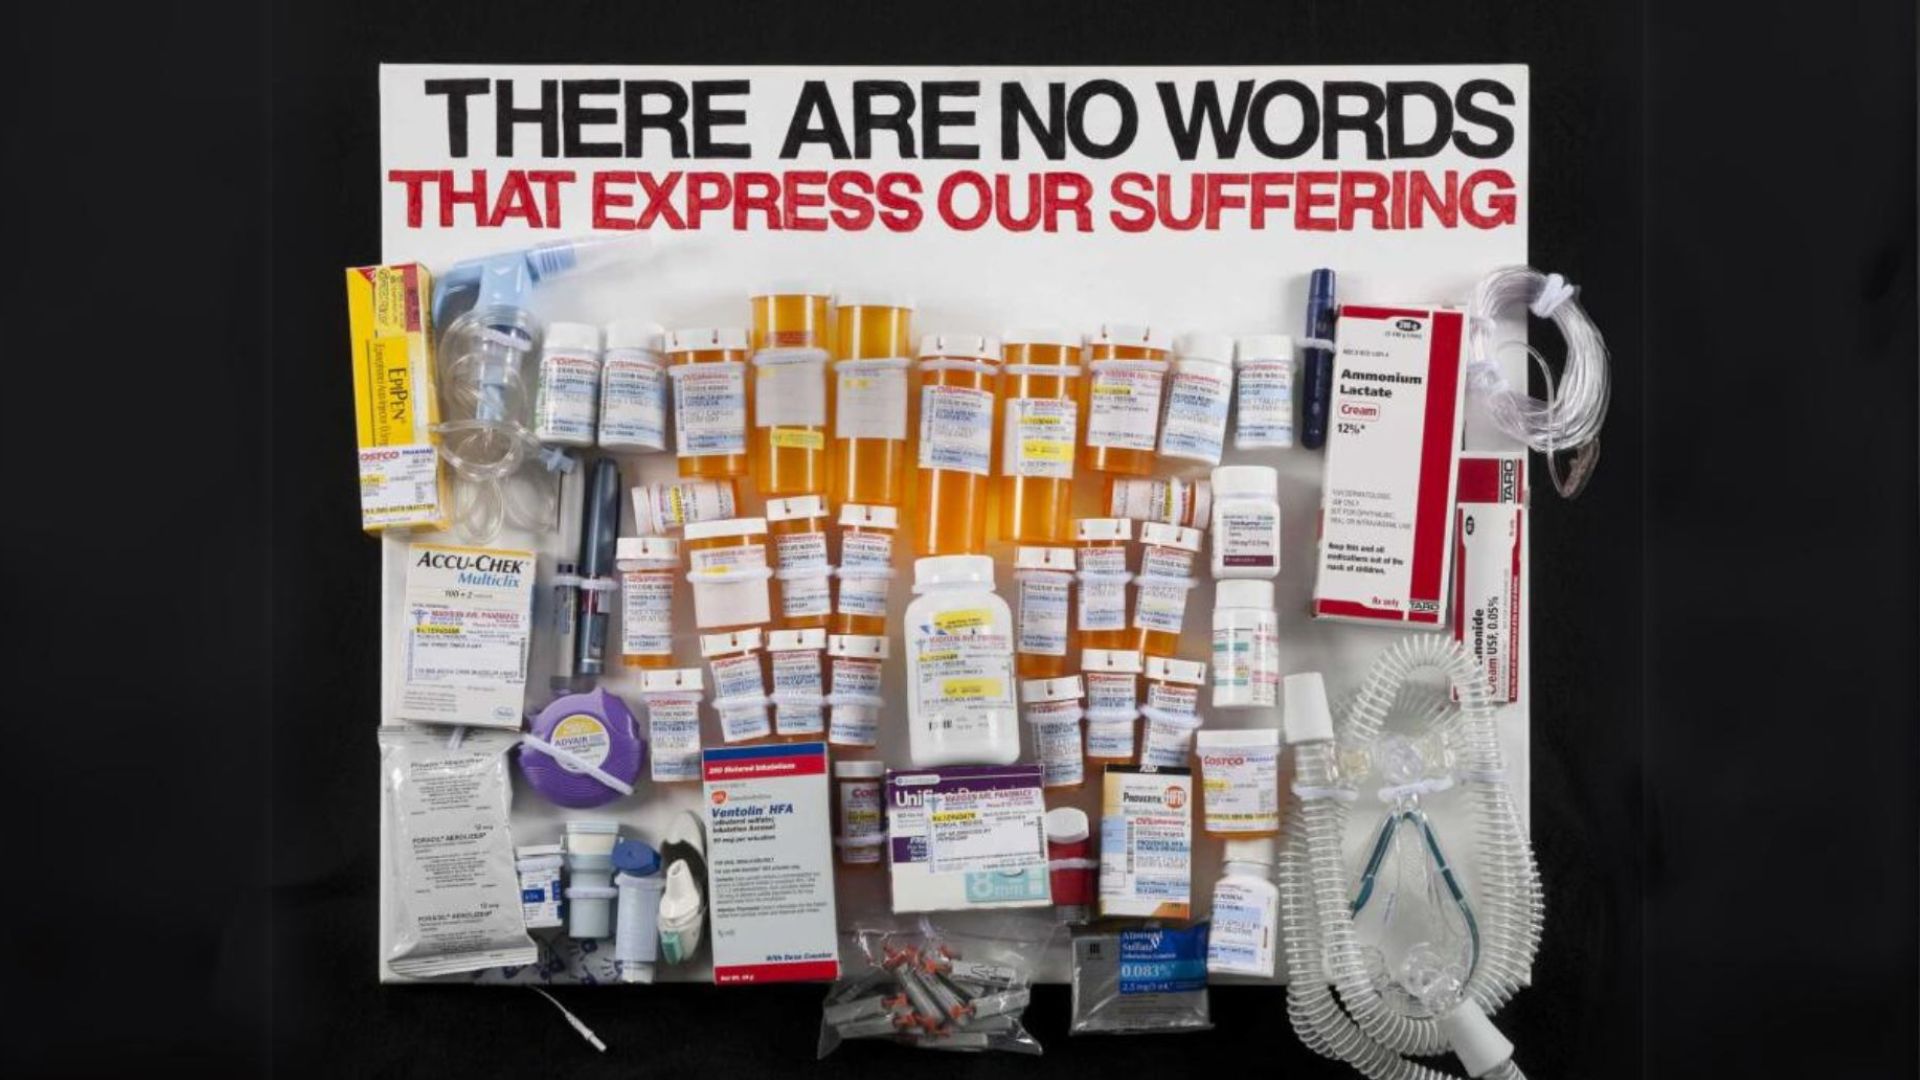 A mixed media poster made up of pill bottles and the text "THERE ARE NO WORDS THAT EXPRESS OUR SUFFERING"